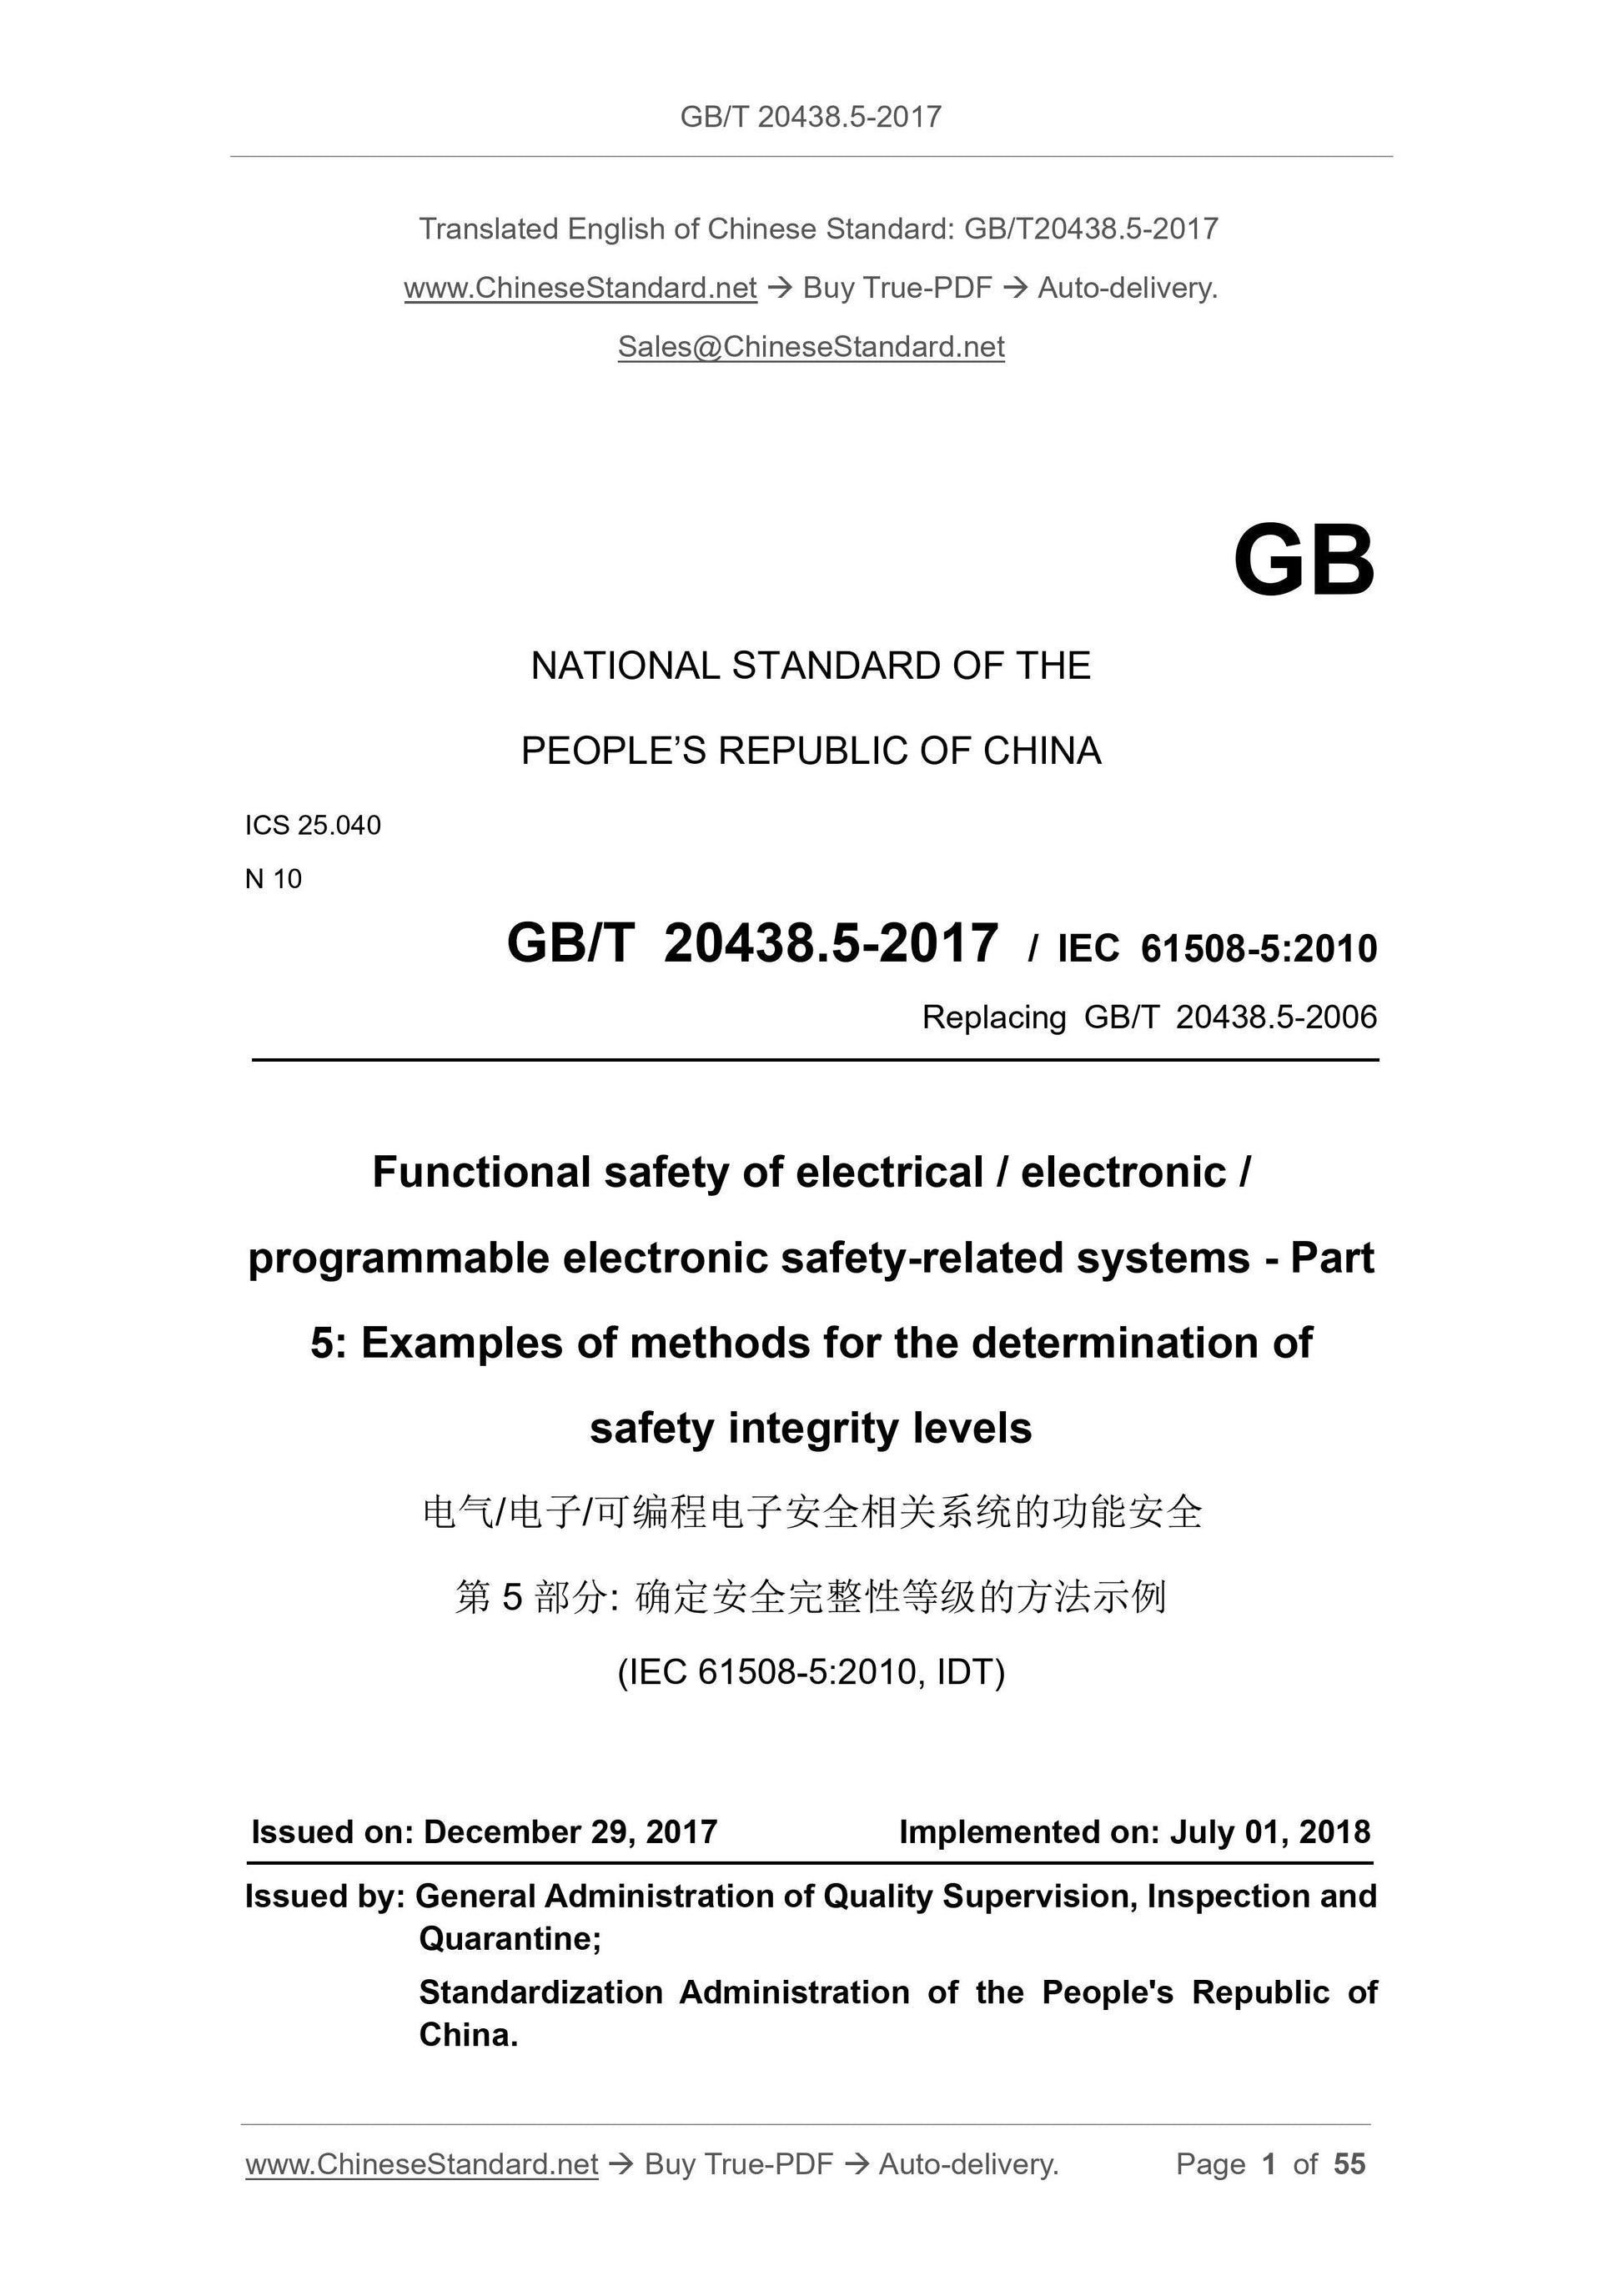 GB/T 20438.5-2017 Page 1